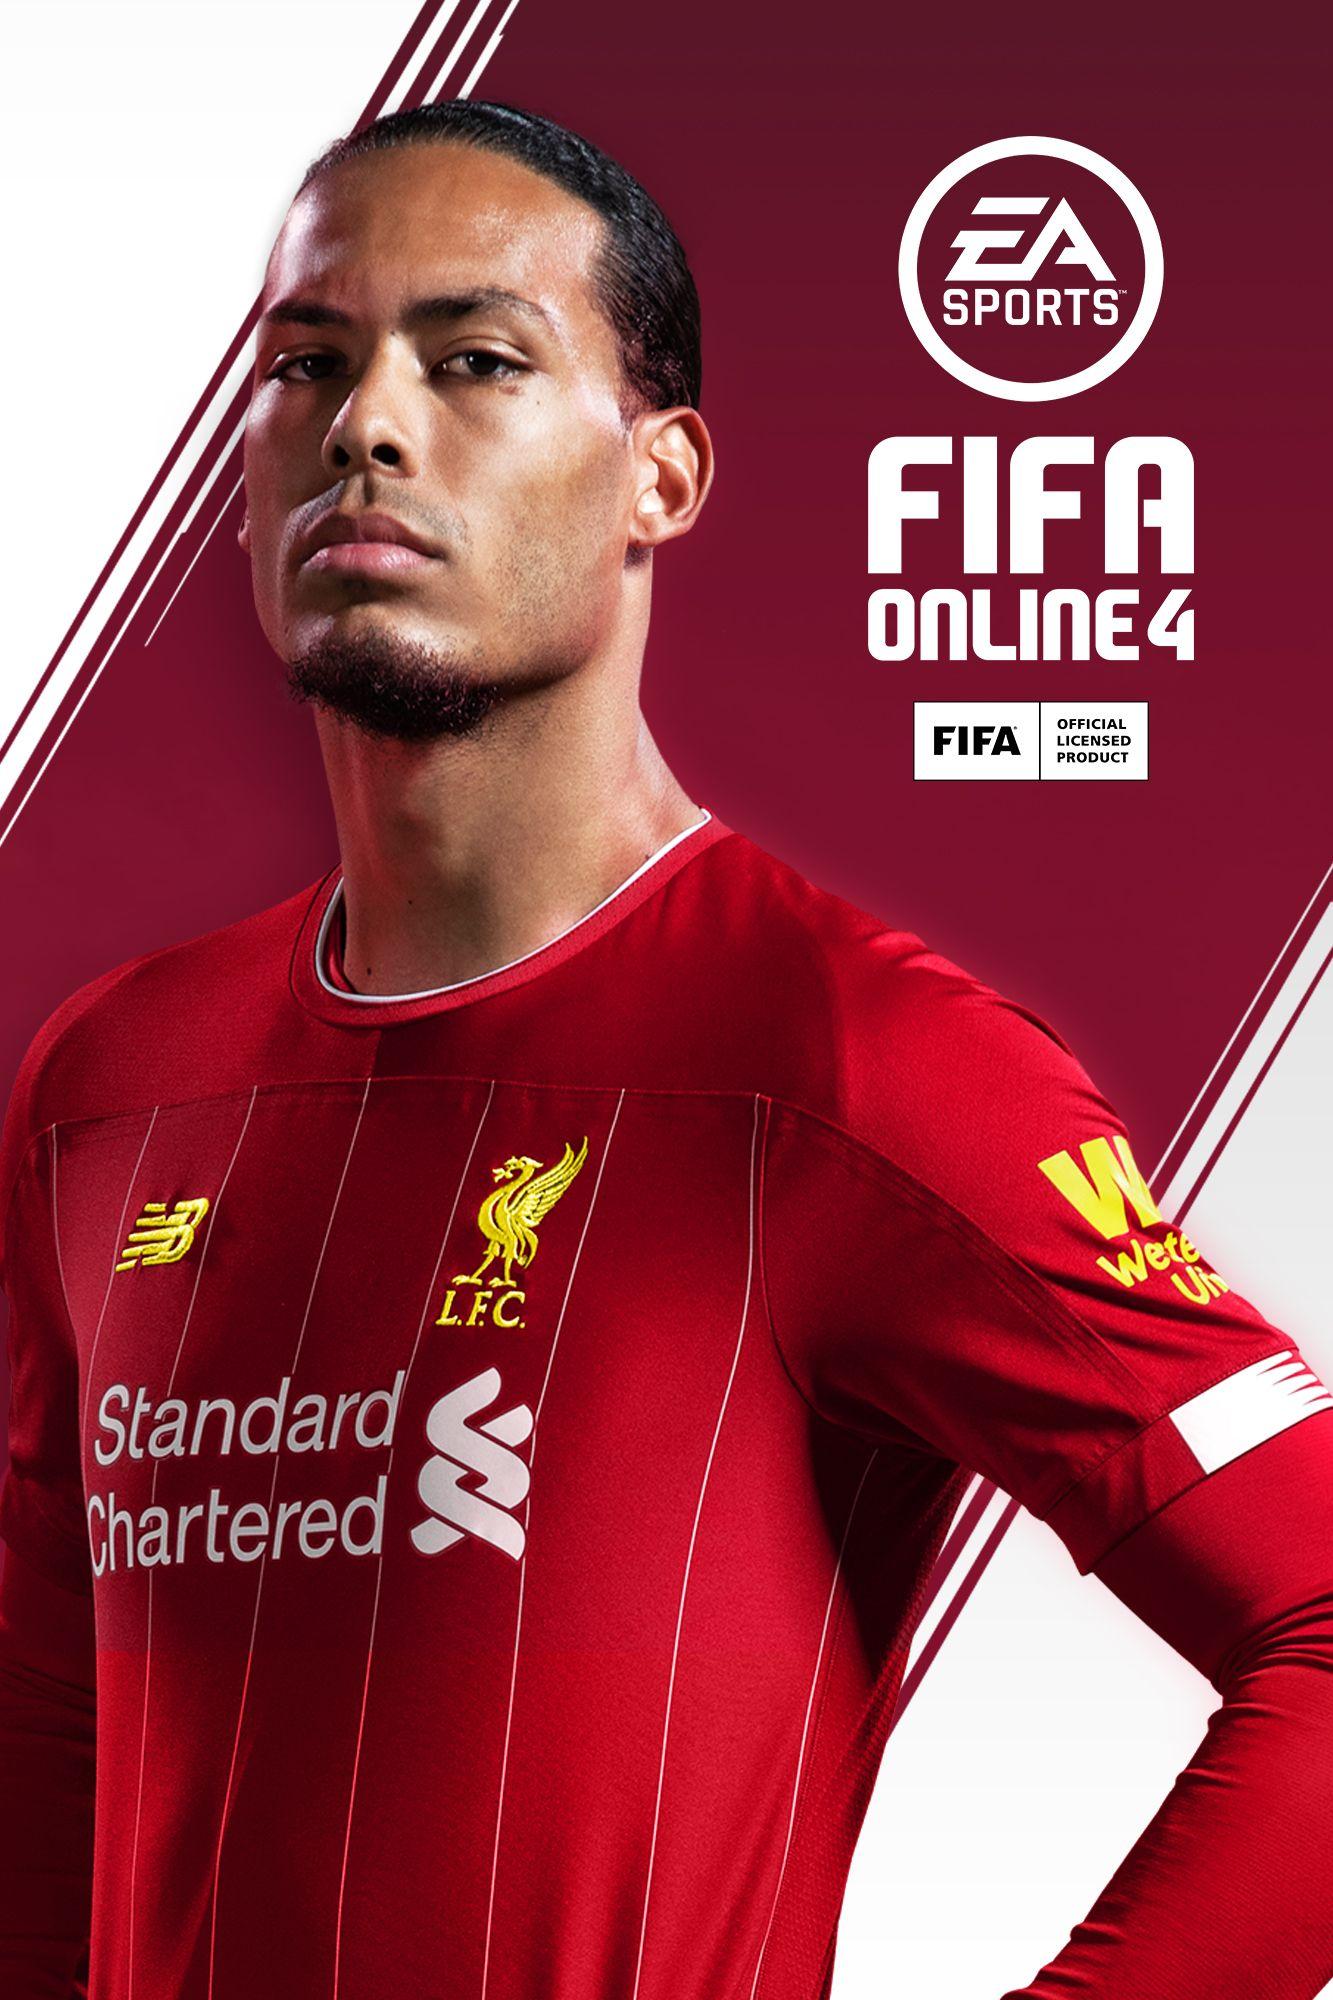 download free fifa online 3 download 2022